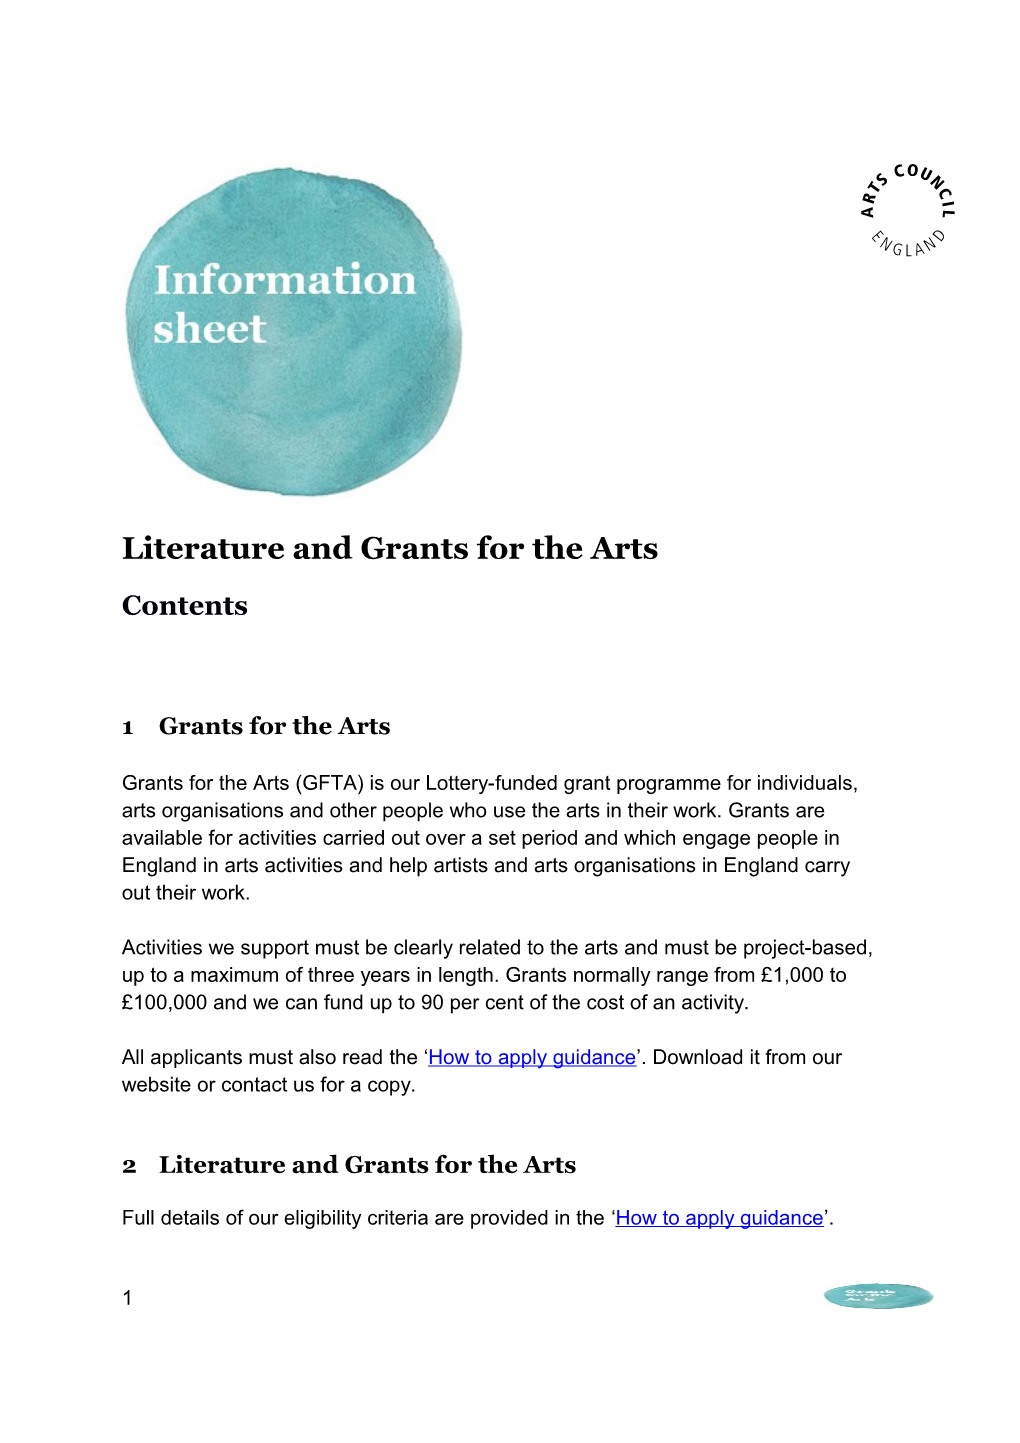 Literature and Grants for the Arts